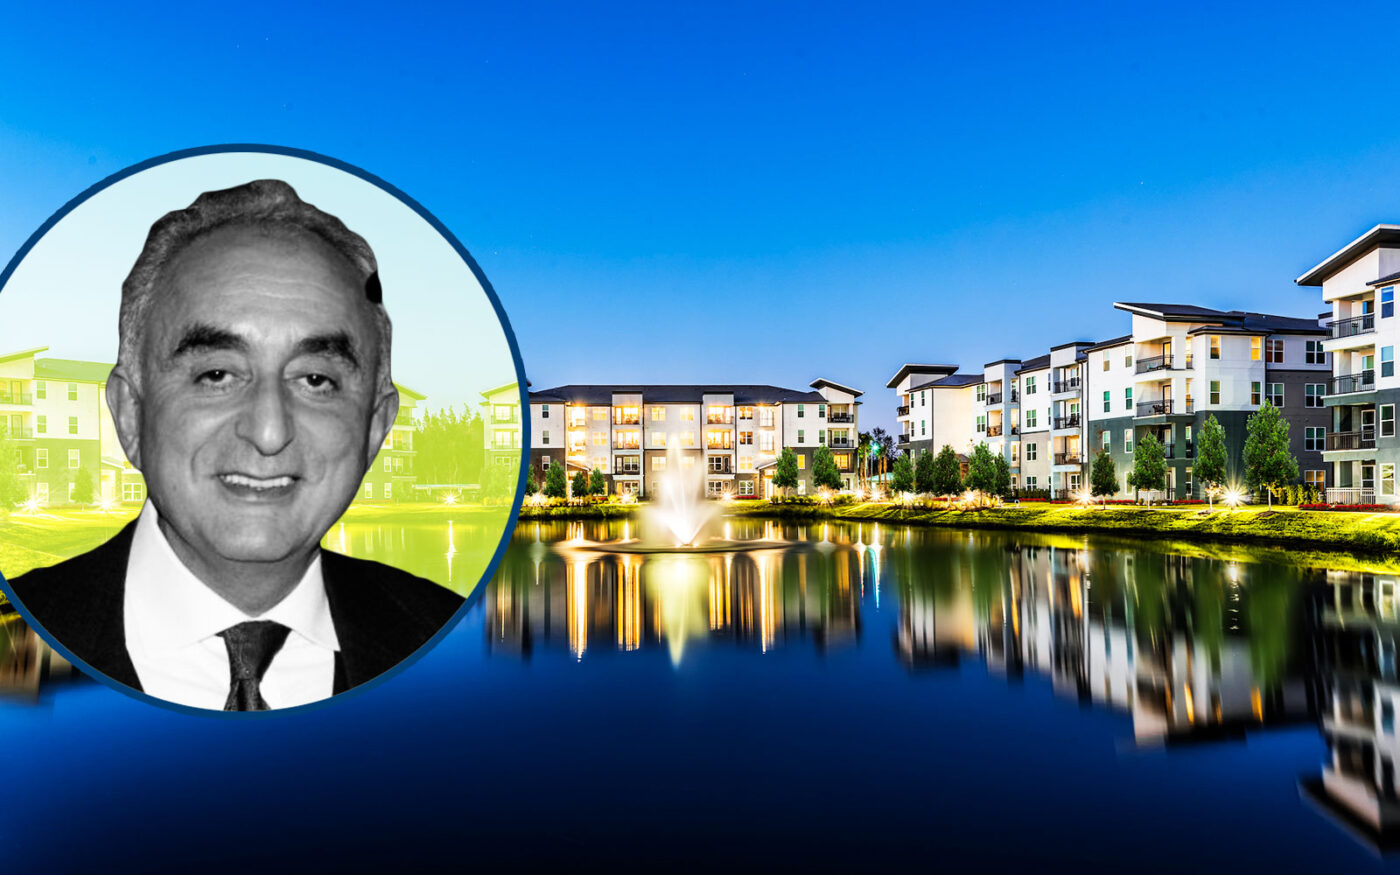 Universe Shells out $66M for Tampa Bay Apartments